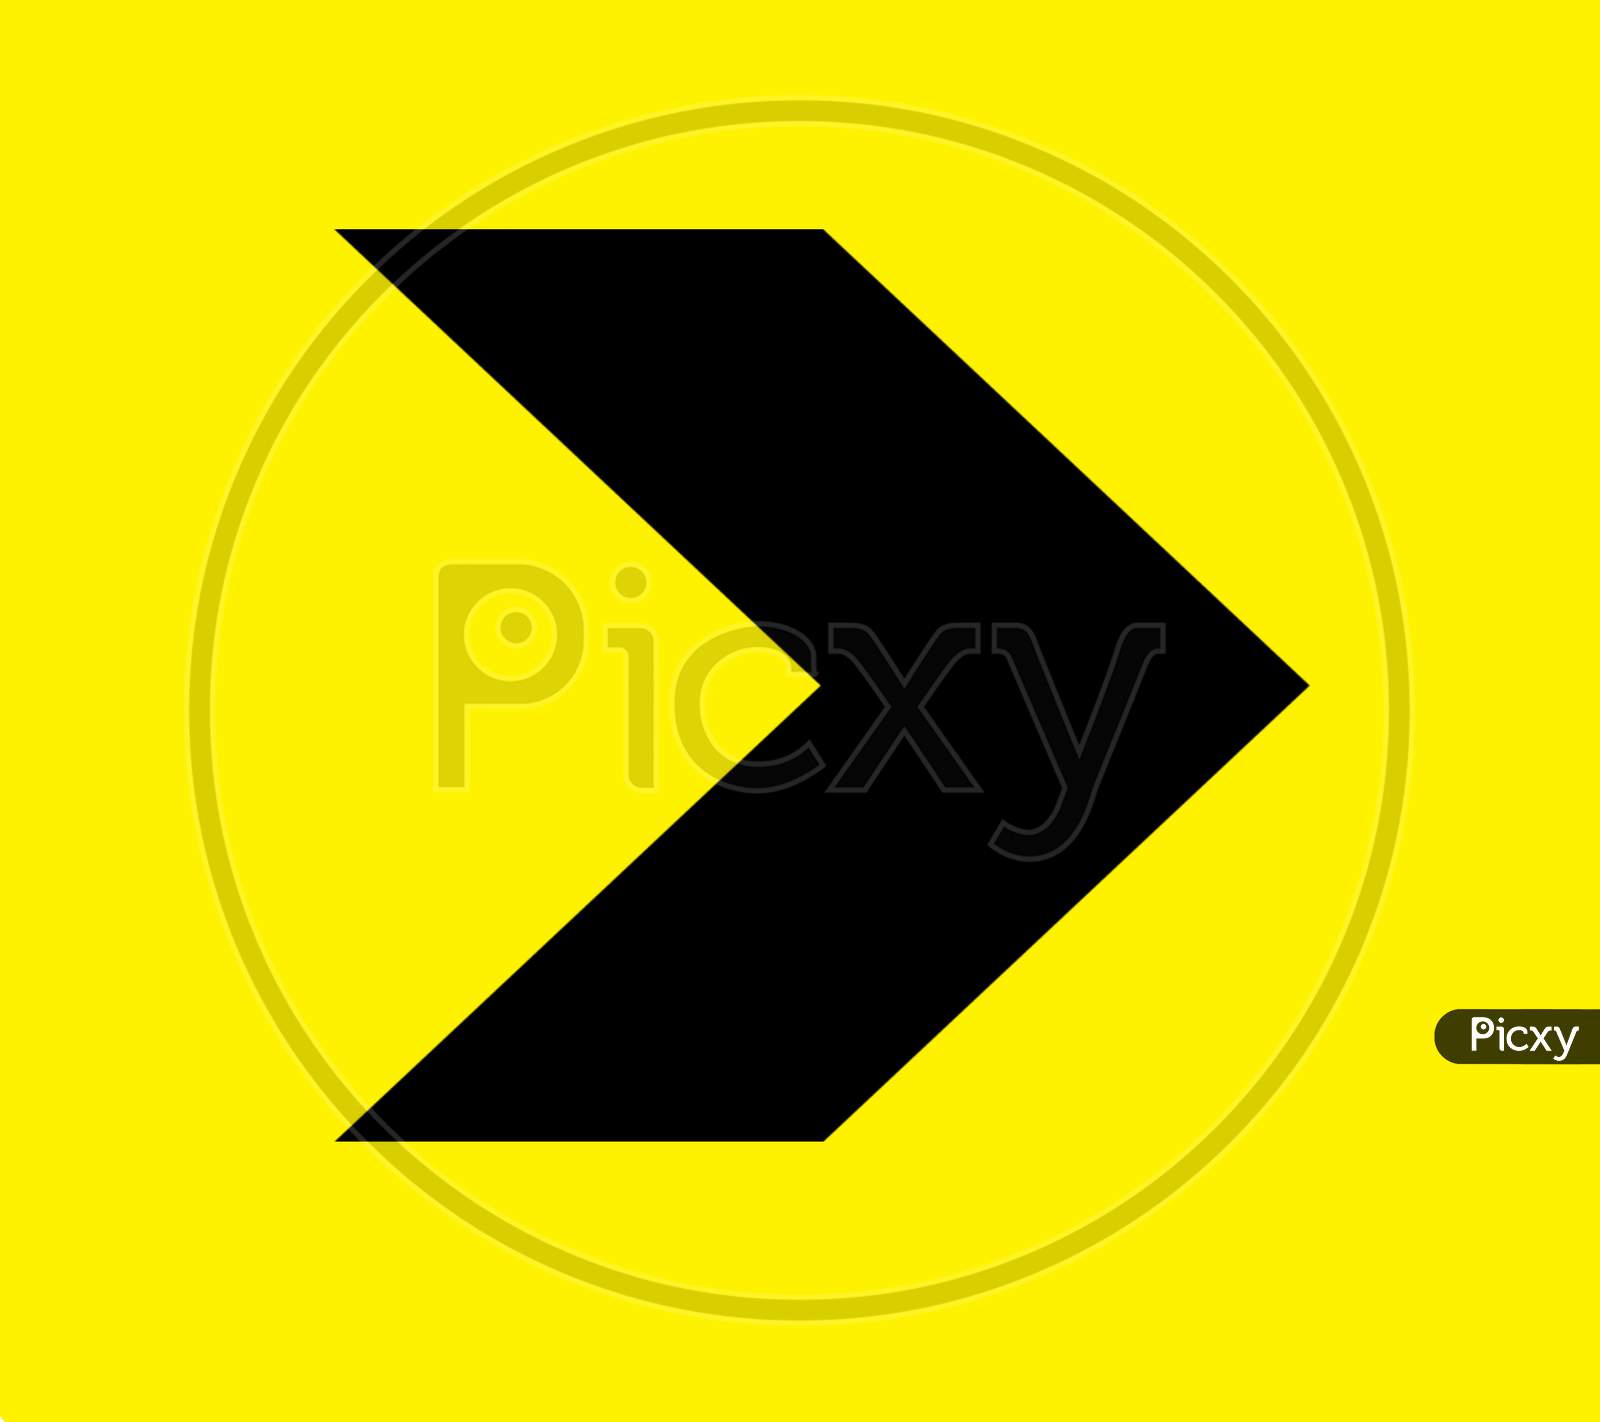 Traffic Sign Right Arrow With Yellow Background.